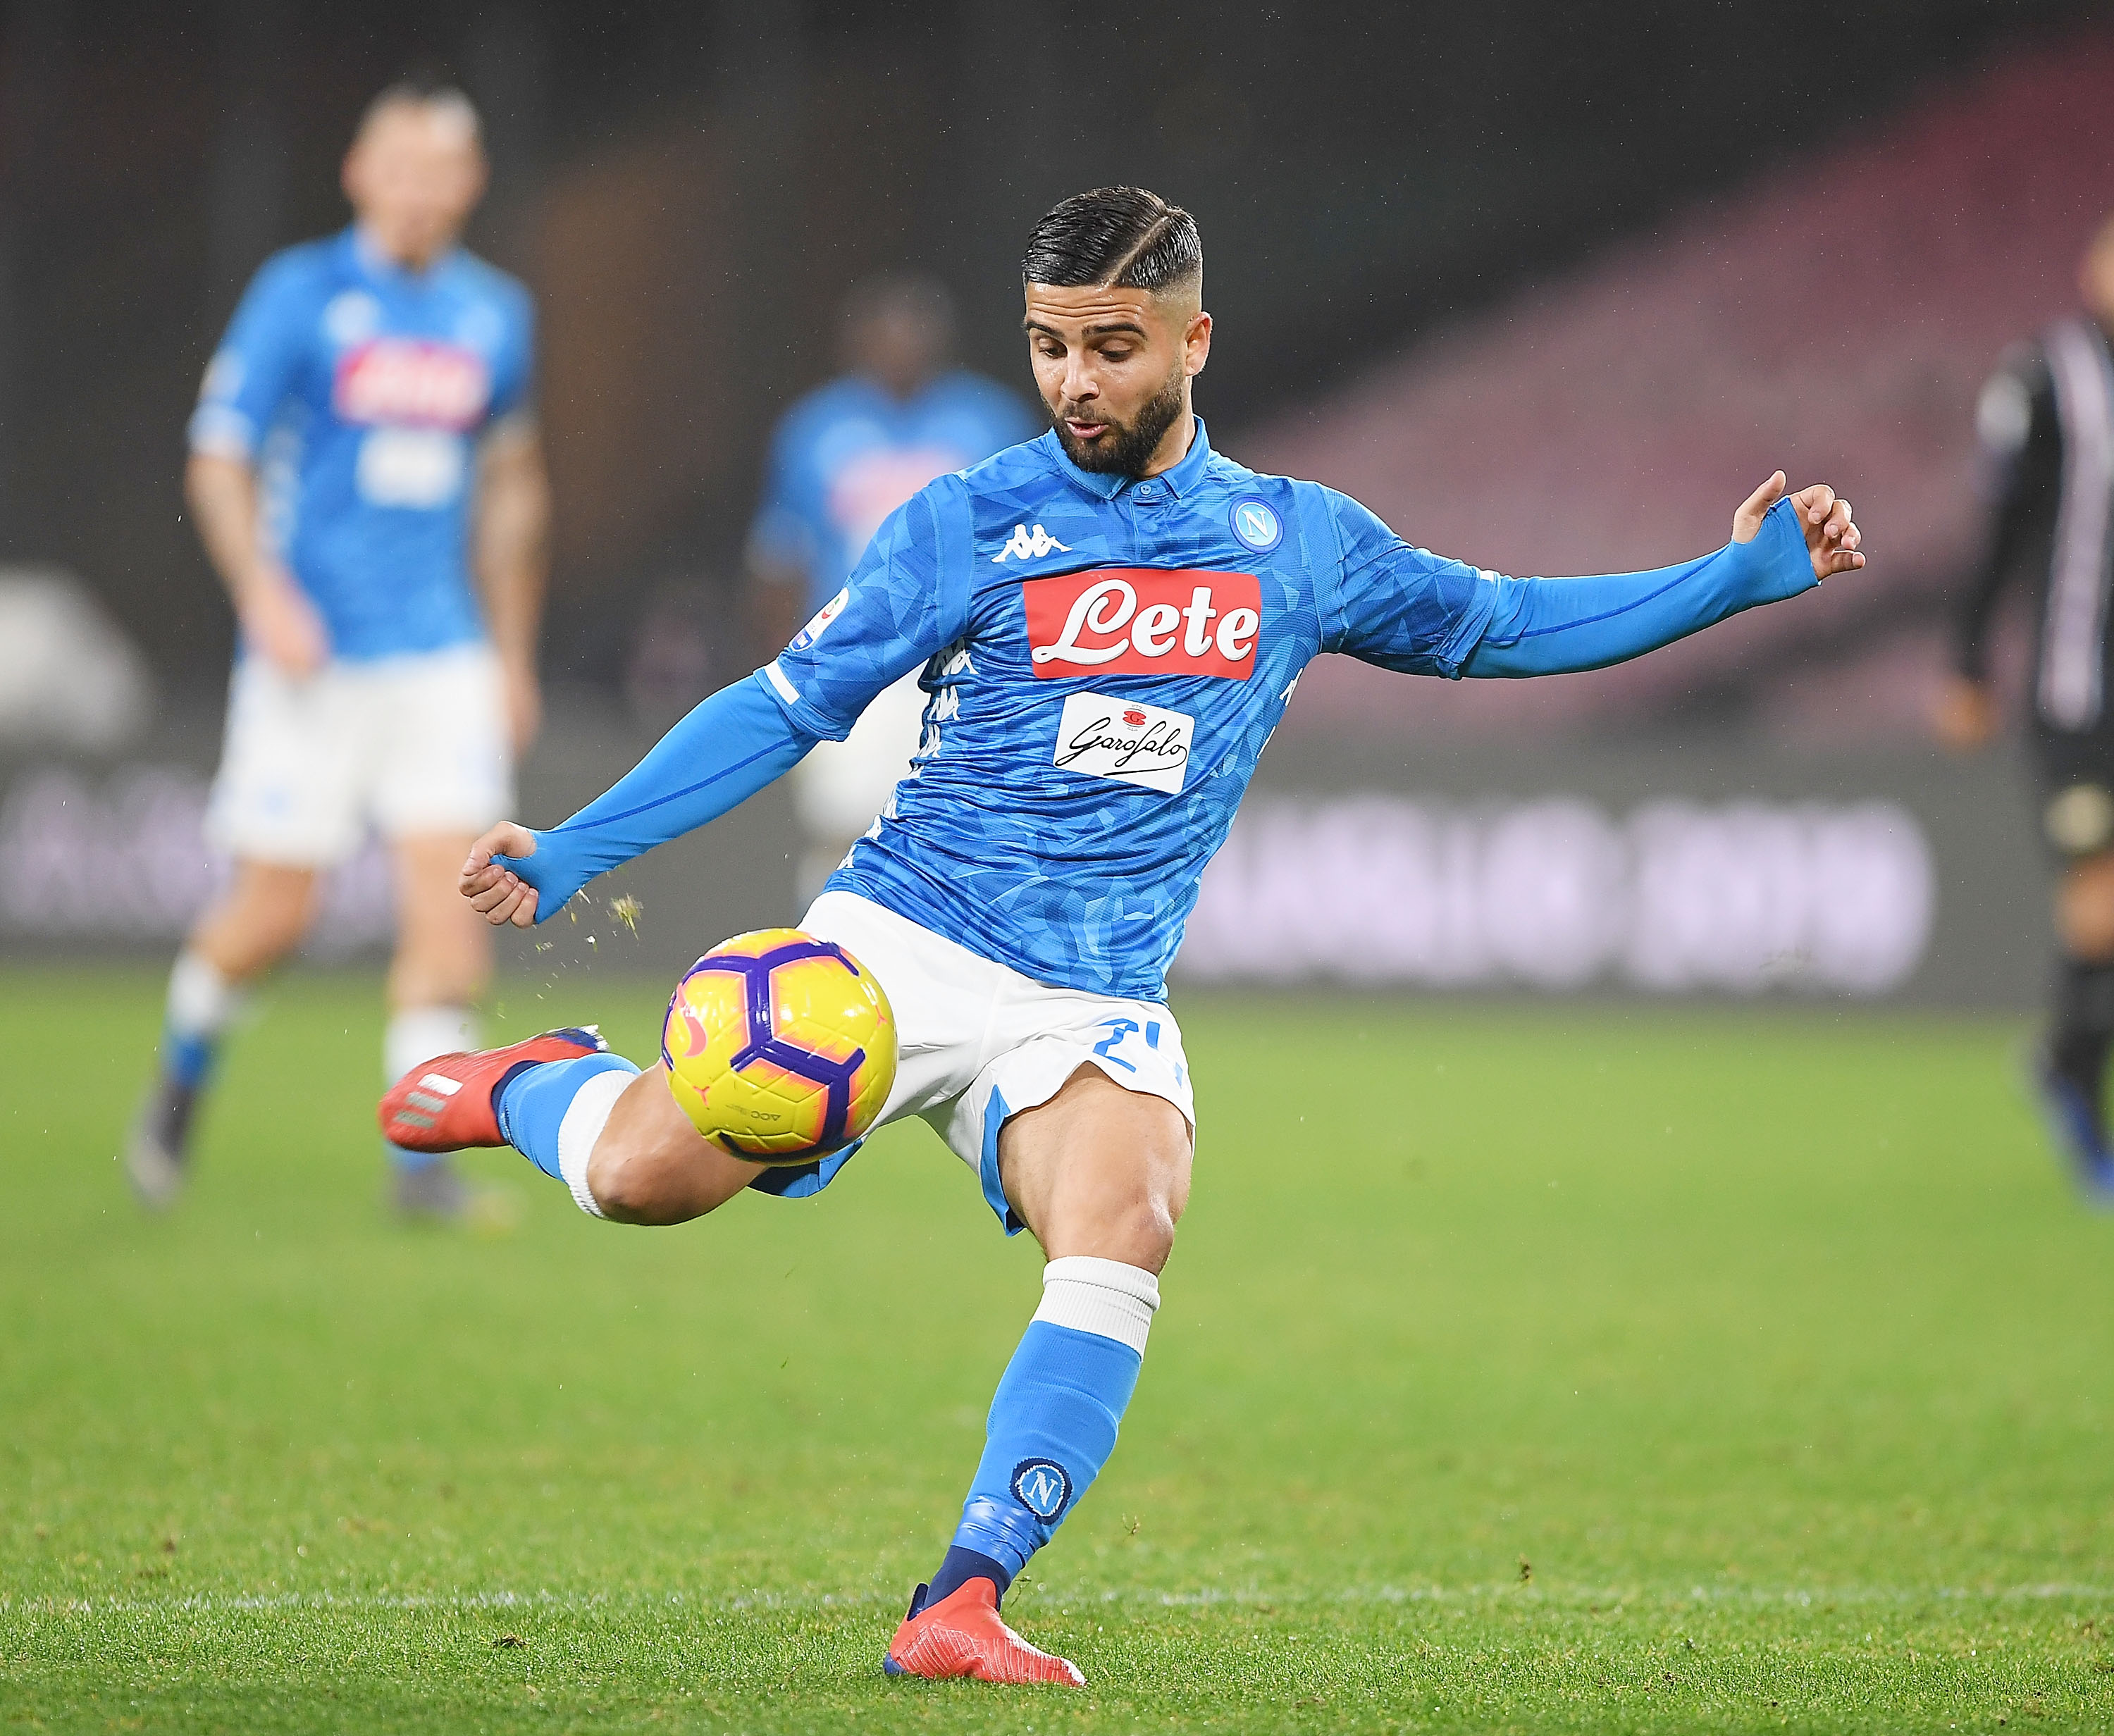 Insigne closing in on a switch to Everton?(Picture Courtesy - AFP/Getty Images)